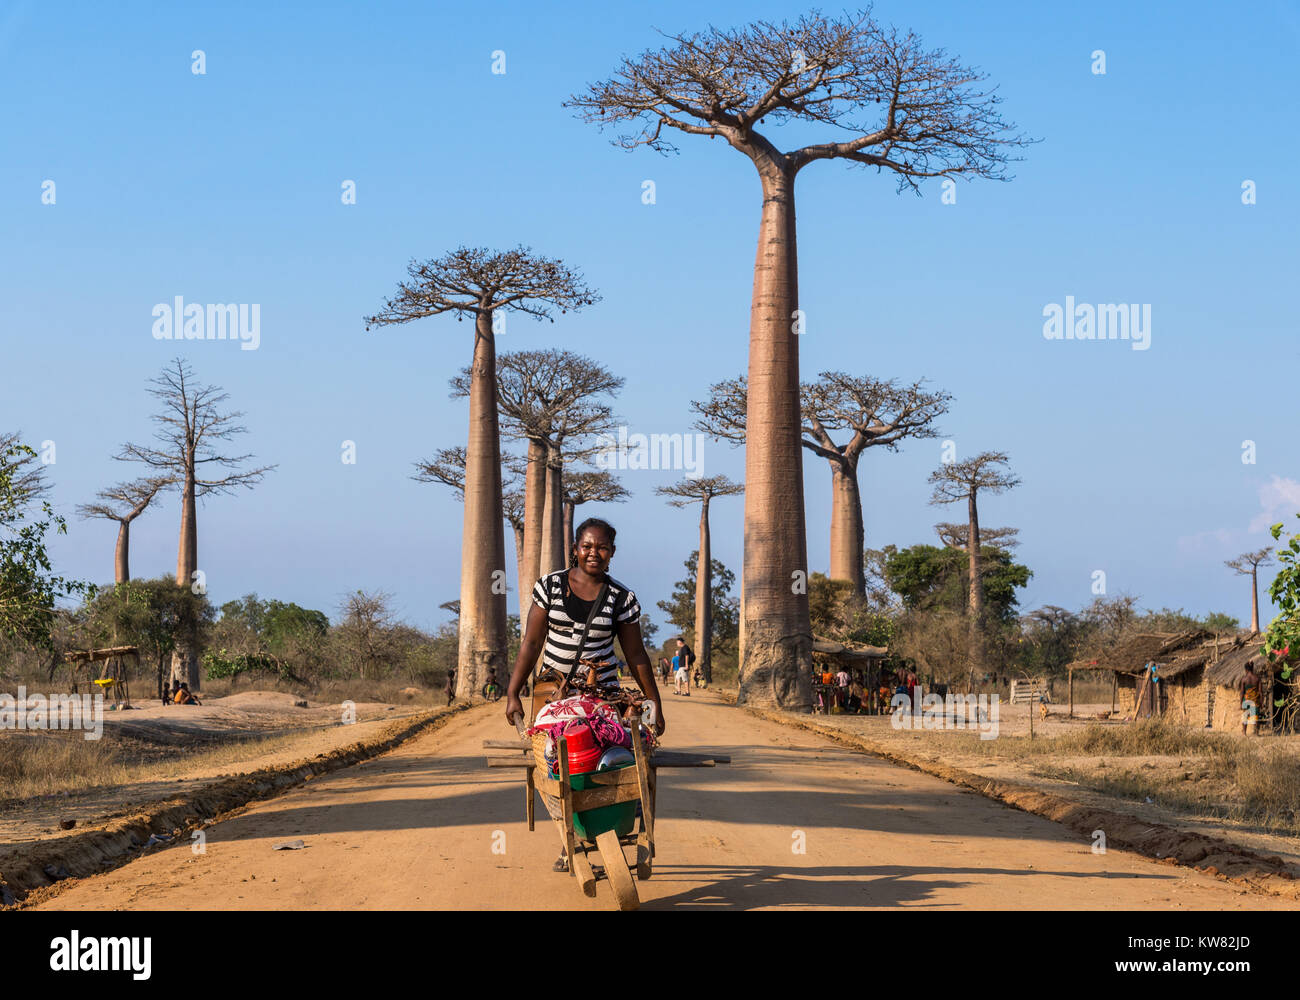 A Malagasy woman pushing a wooden hand cart with souvenirs along the Avenue of Baobabs. Madagascar, Africa. Stock Photo